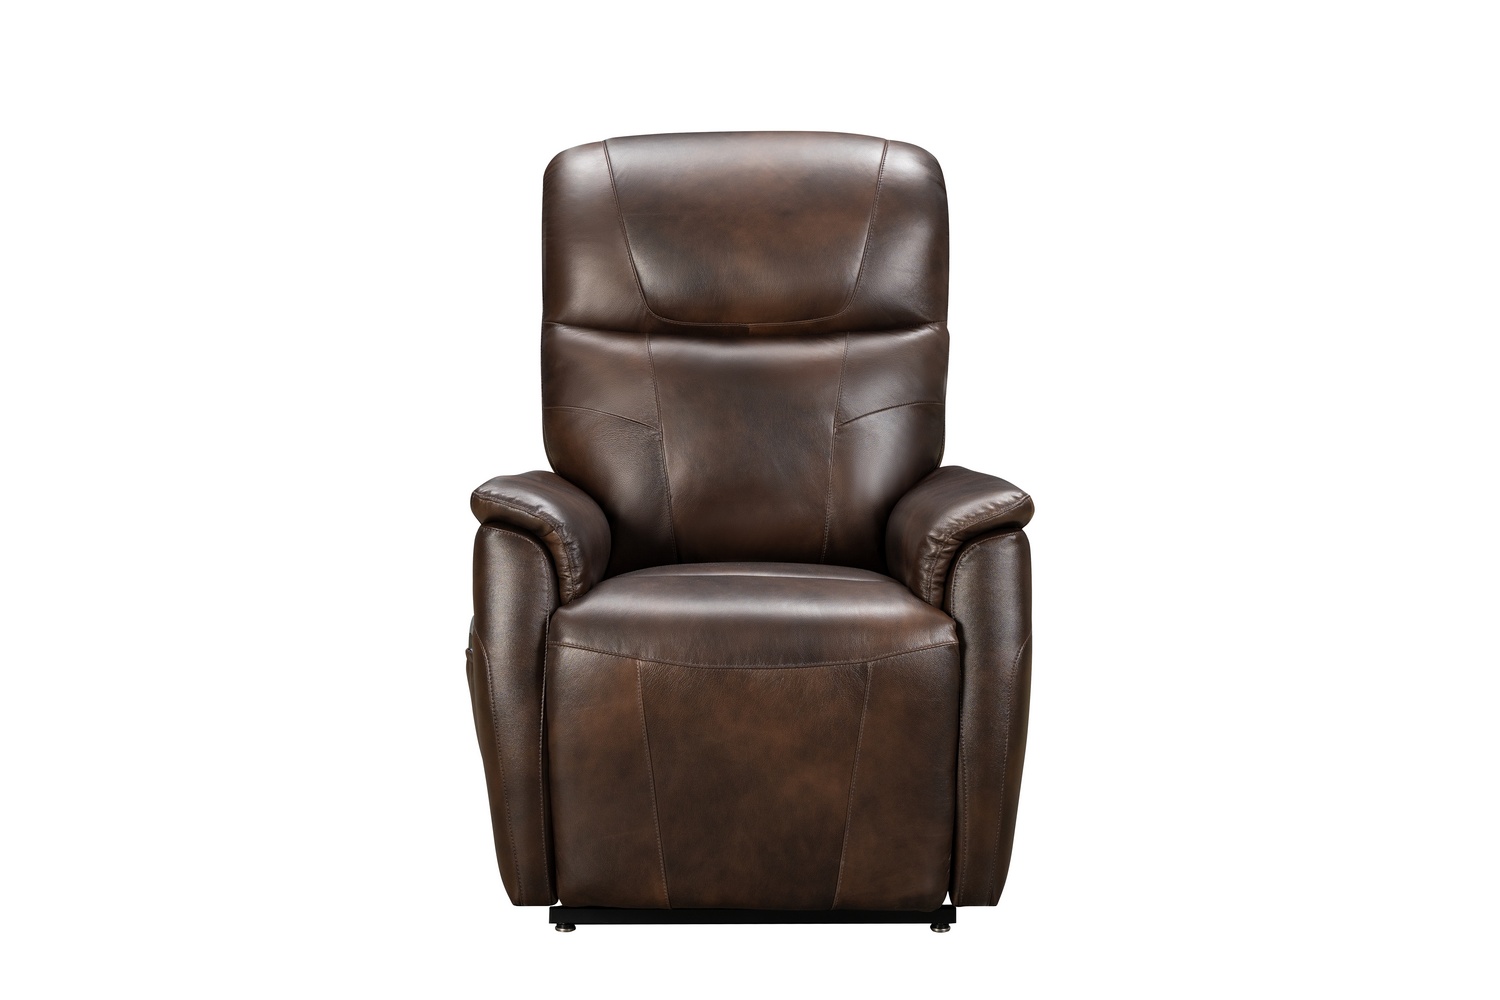 Barcalounger Leighton Lift Chair Recliner Chair with Power Head Rest, Power Lumbar and Lay Flat Mechanism - Tonya Brown/Leather Match